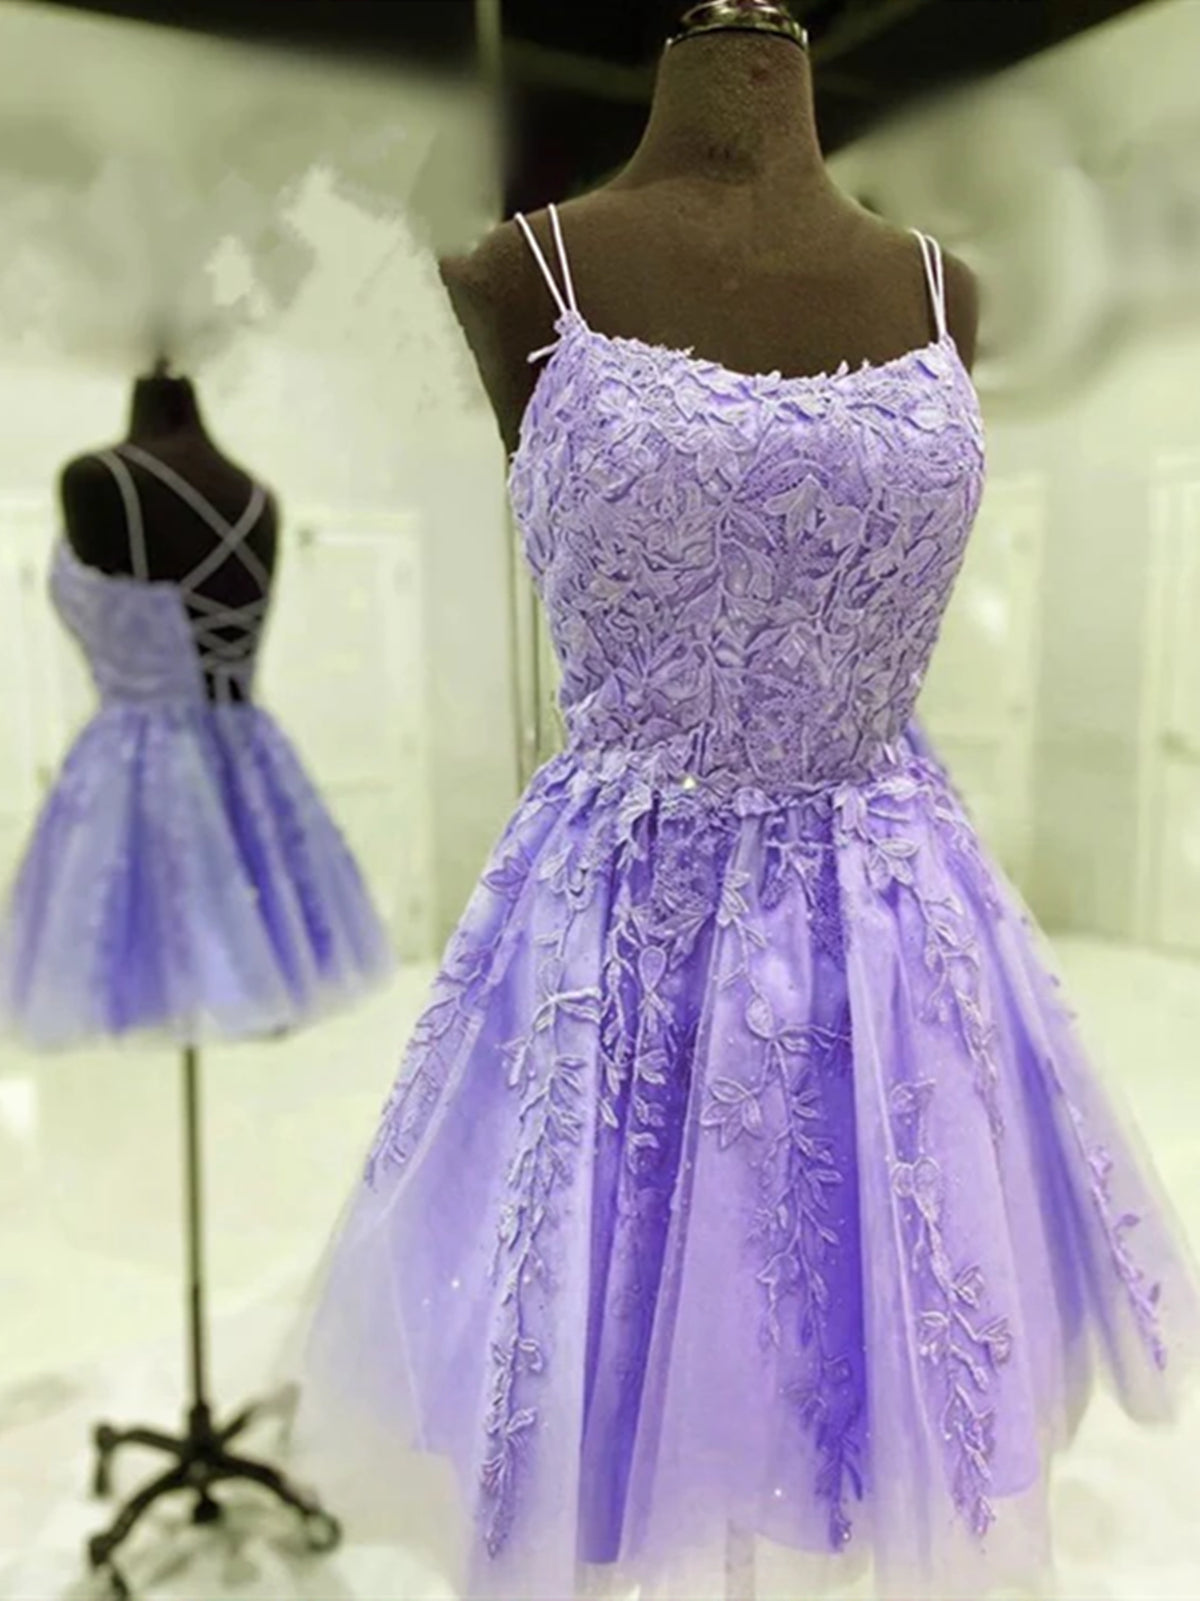 Party Dress Reception Wedding, Short Backless Lace Prom Dresses, Short Backless Purple Lace Formal Homecoming Dresses